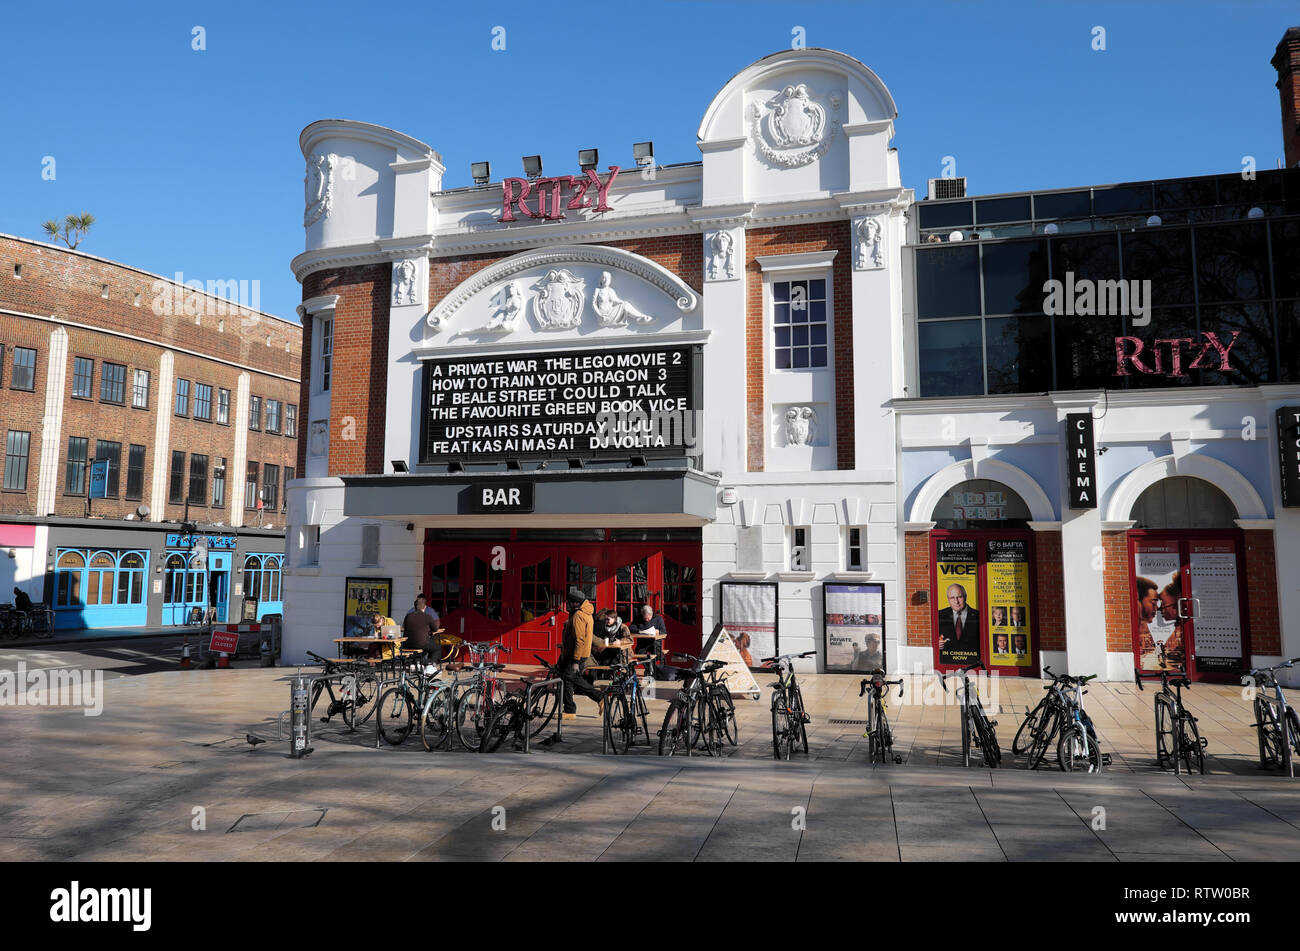 Brixton street scene Ritzy Cinema and Bar exterior view showing movies films in Brixton South London UK  KATHY DEWITT Stock Photo